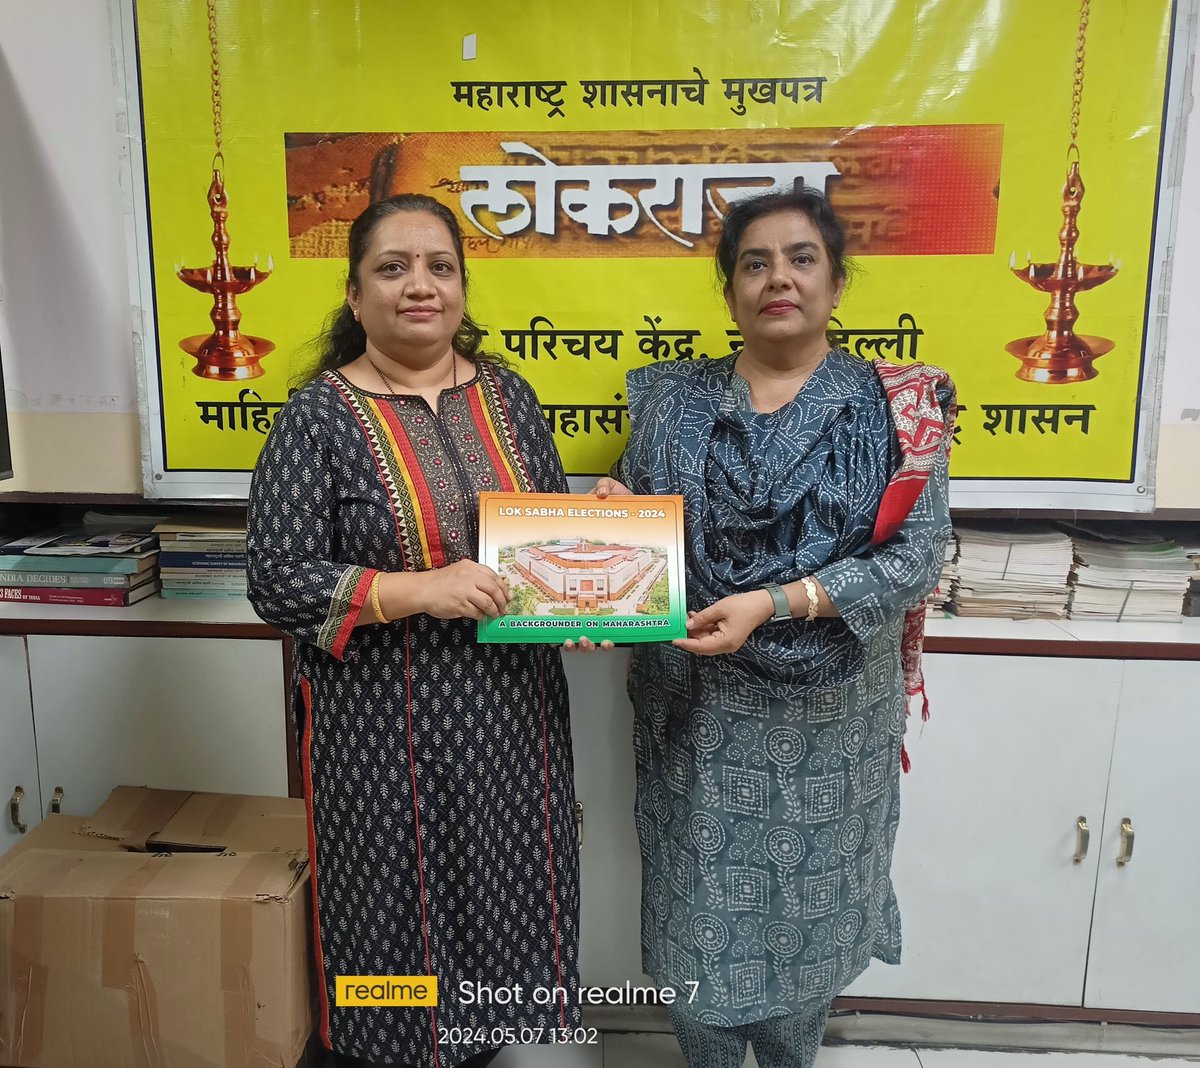 The Additional Director BARTI, Pune & former PRO, MIC New Delhi, Ms Snehal Bhosale visited #MahaInfoCentre today. Dy. Director @AroraAmarjyot welcomed her &presented her a copy of Maharashtra Election Backgrounder-2024 Had a great conversation about the working of both offices.